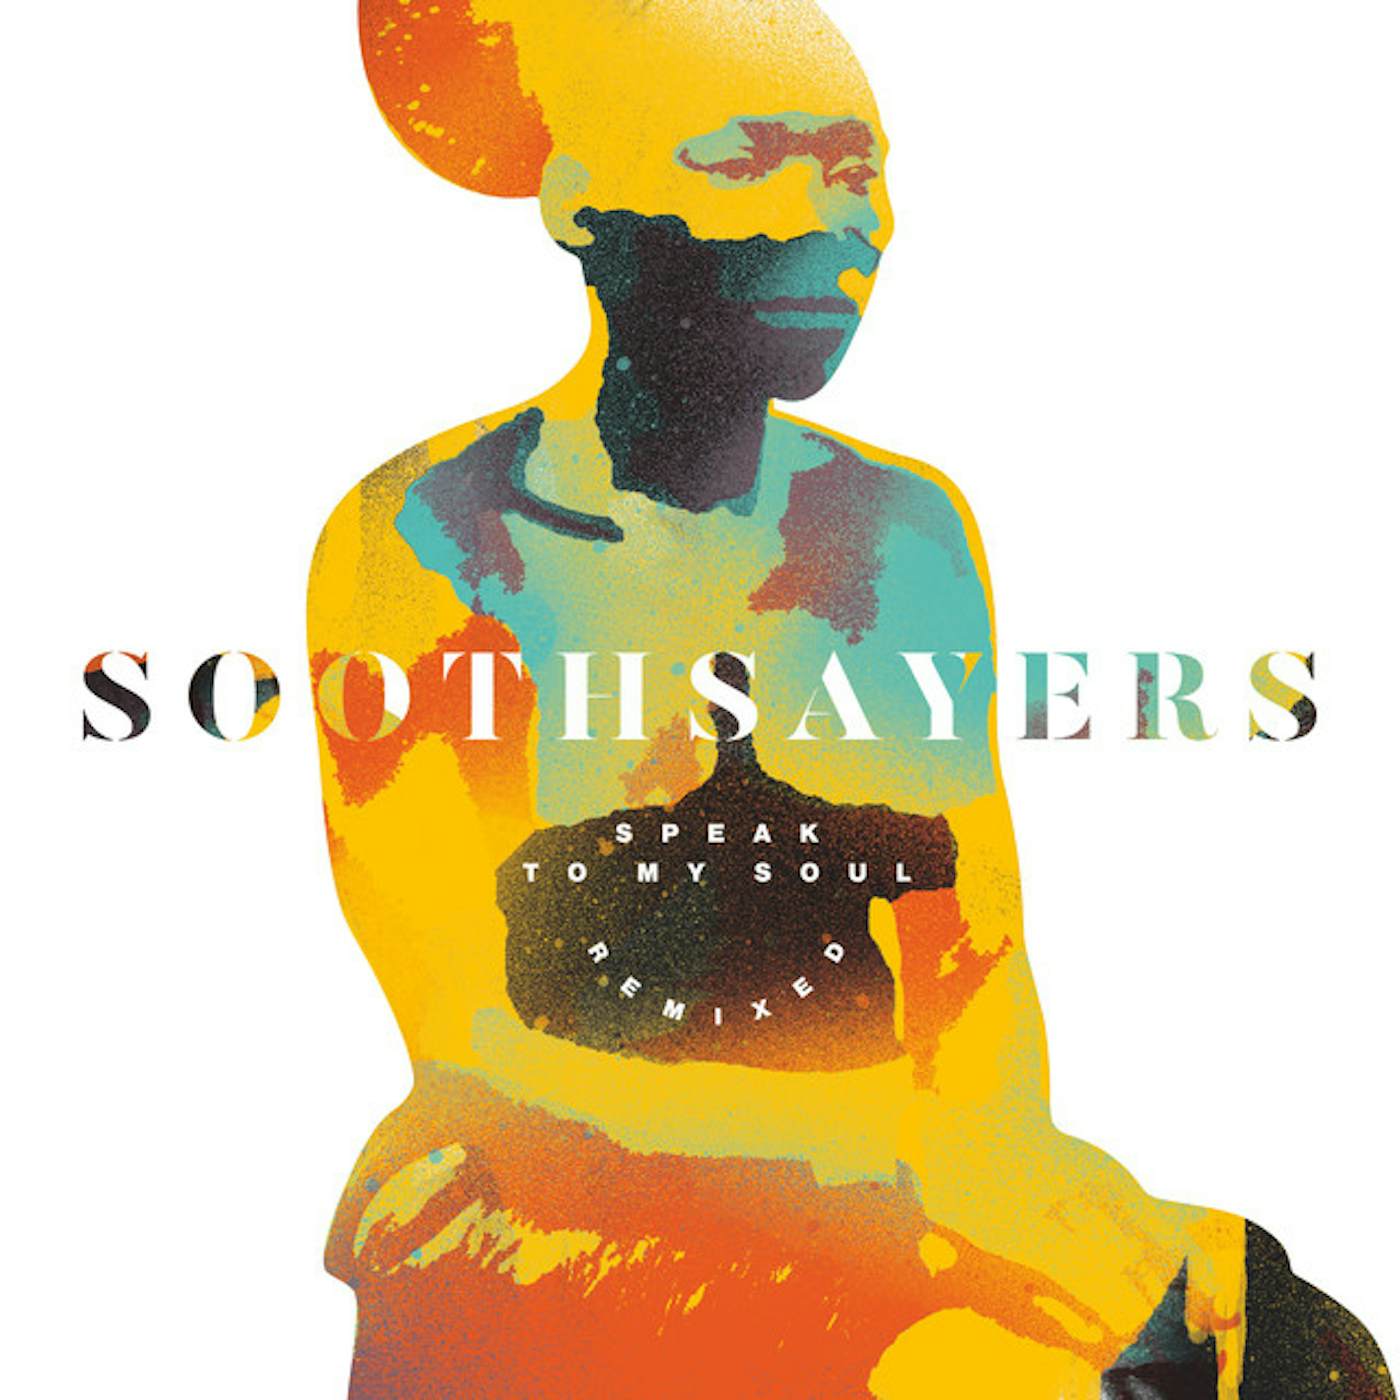 Soothsayers SPEAK TO MY SOUL: REMIXED Vinyl Record